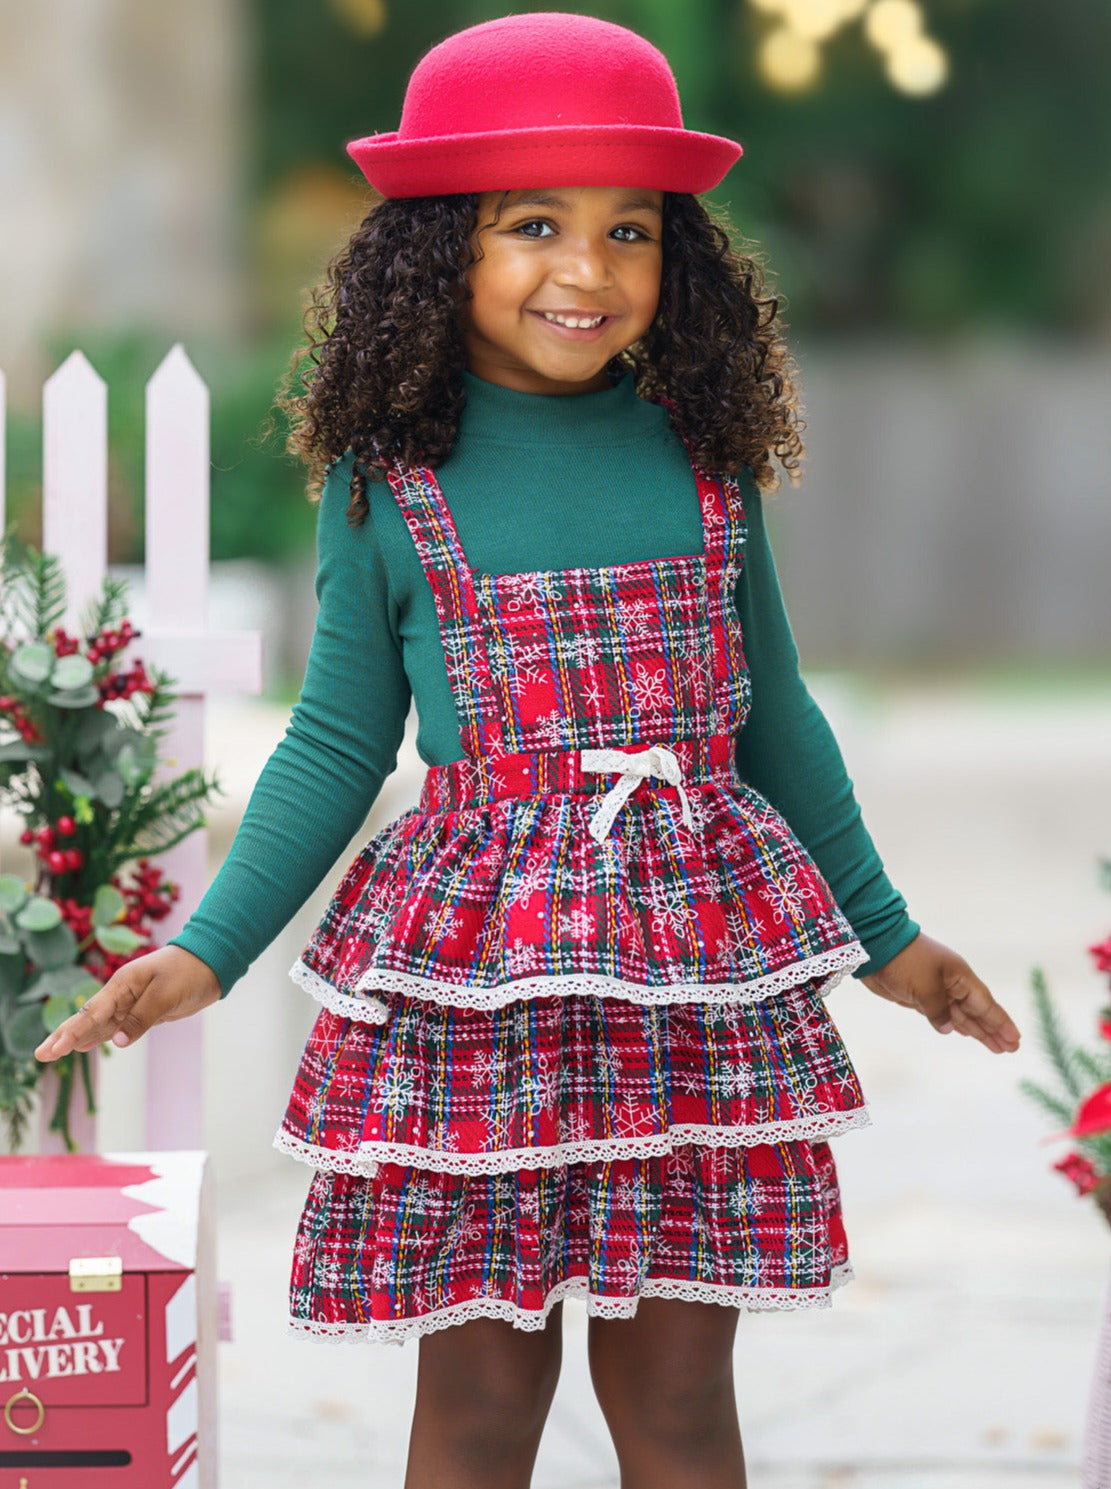 Mia Belle Girls Turtleneck Top & Overall Dress | Girls Winter Outfits